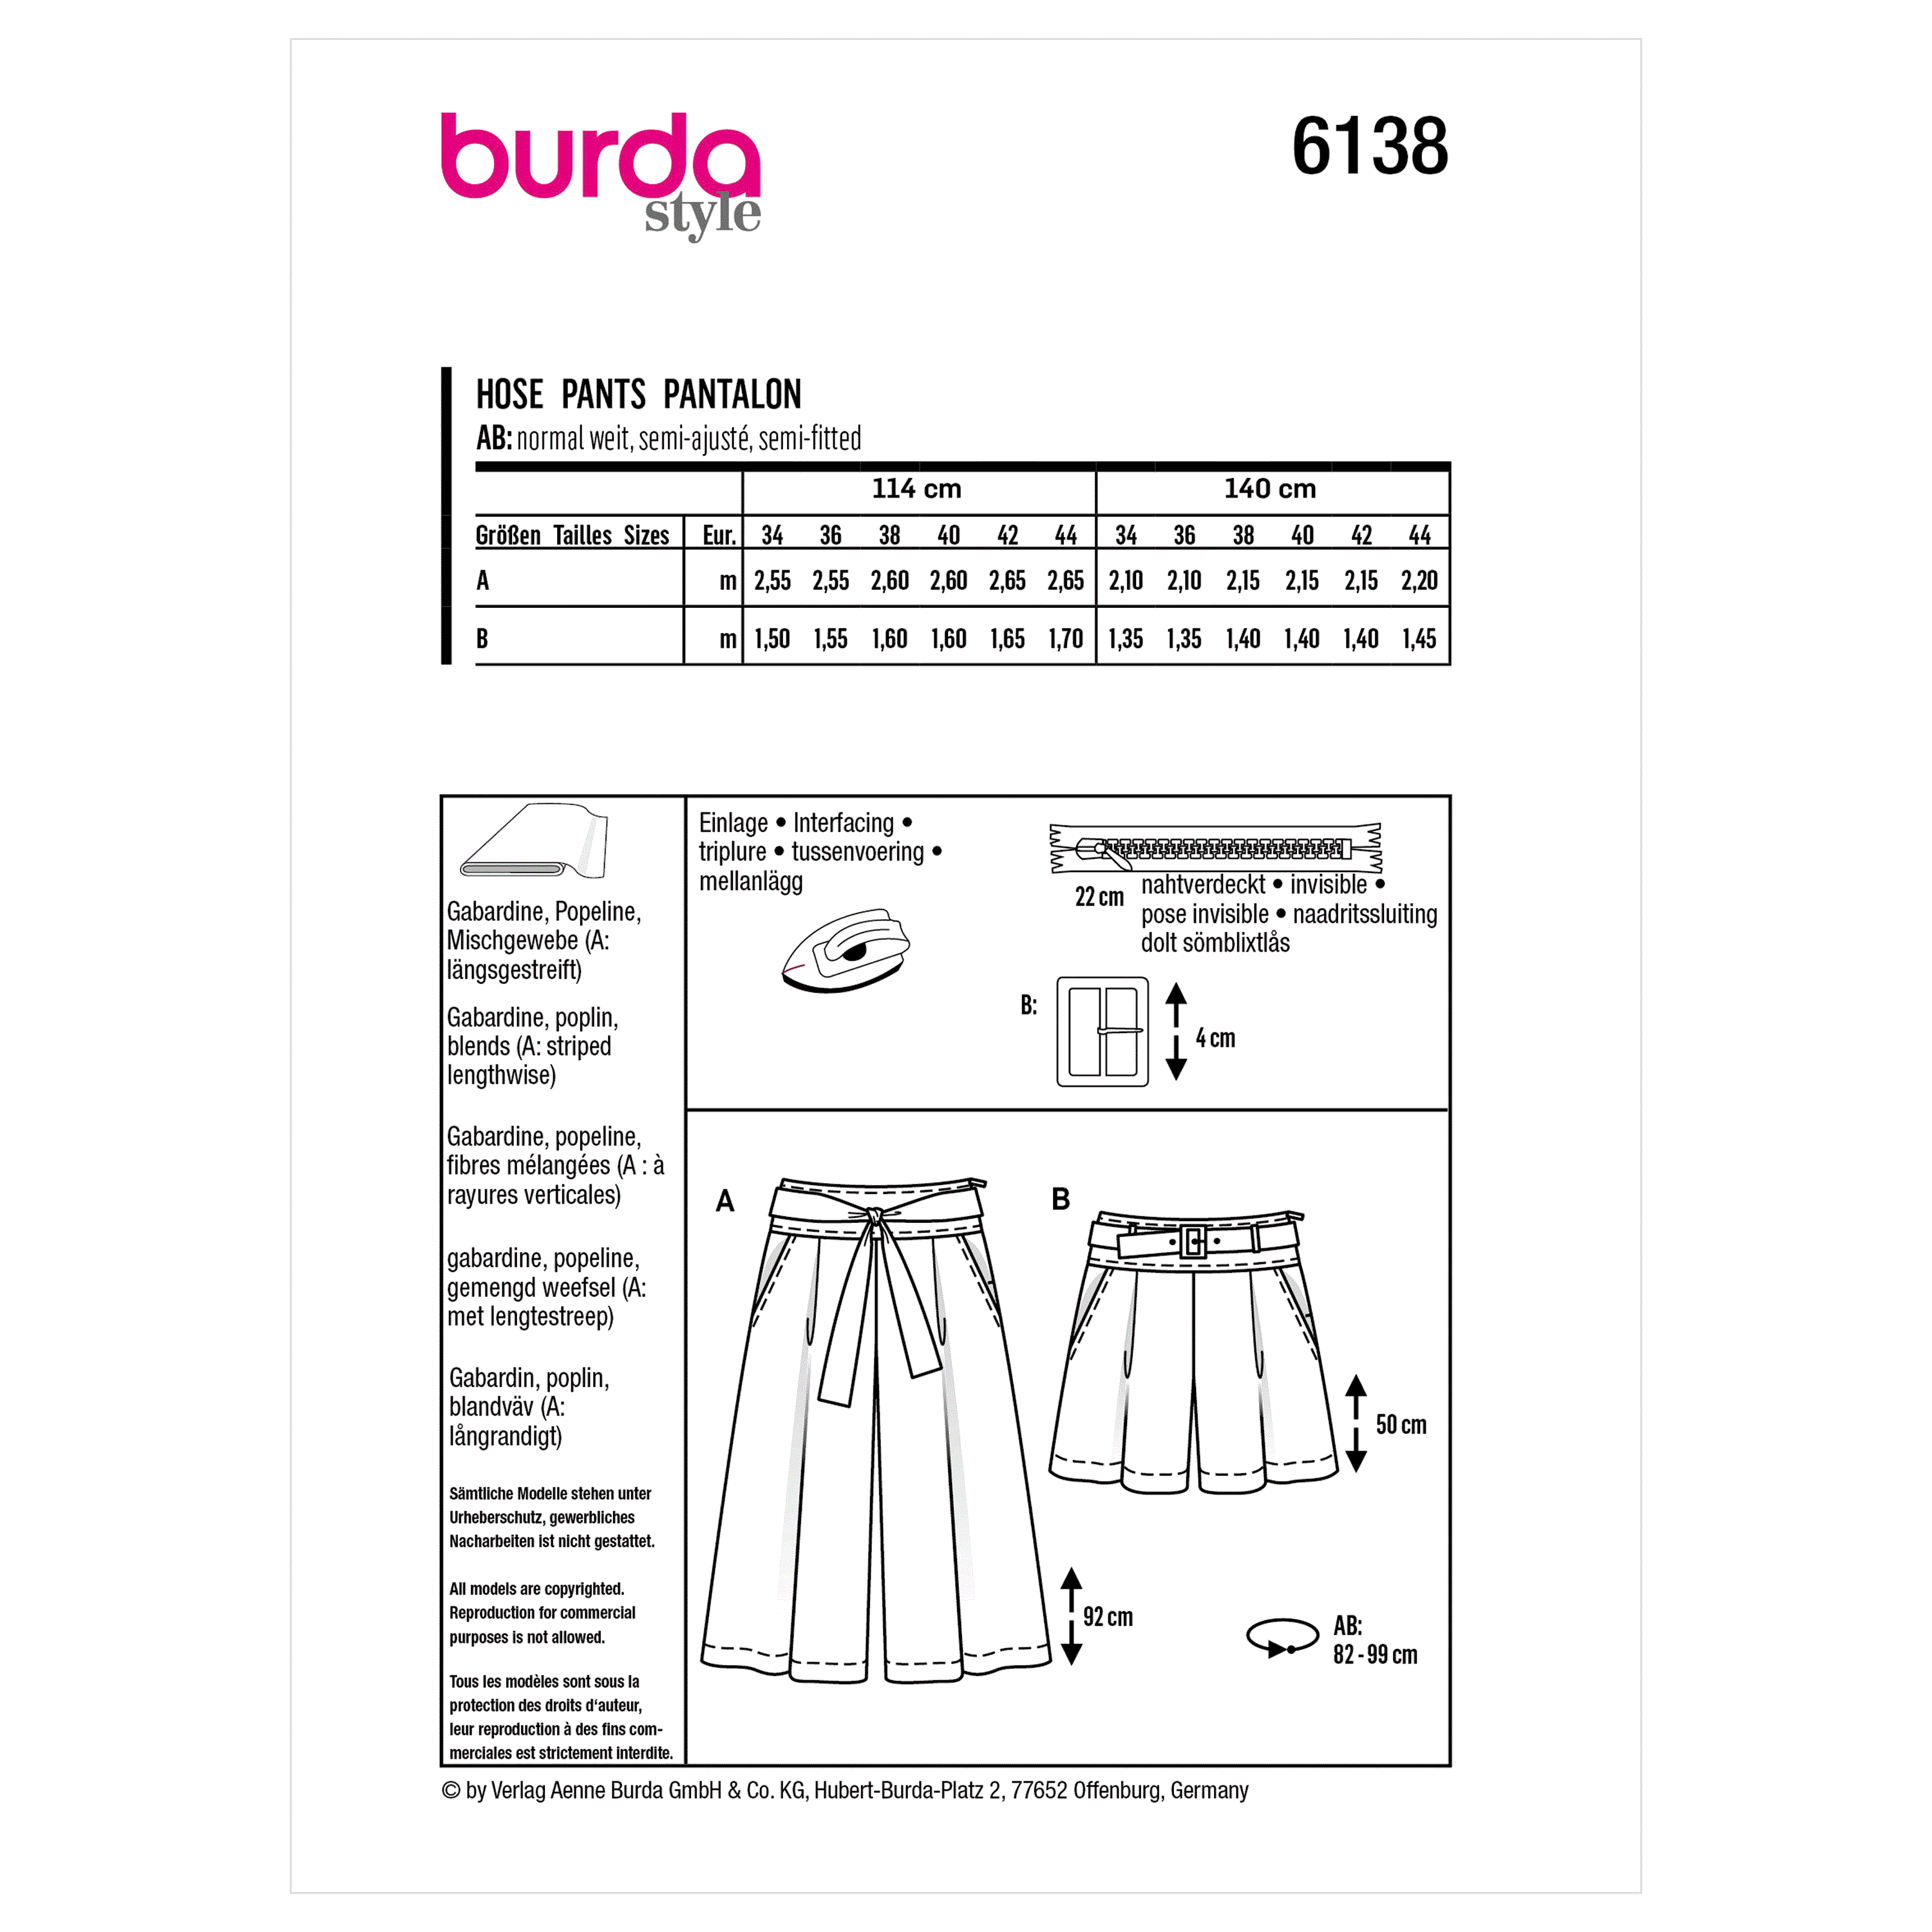 Burda Sewing Pattern 6138 Culottes, Trousers, Pants from Jaycotts Sewing Supplies